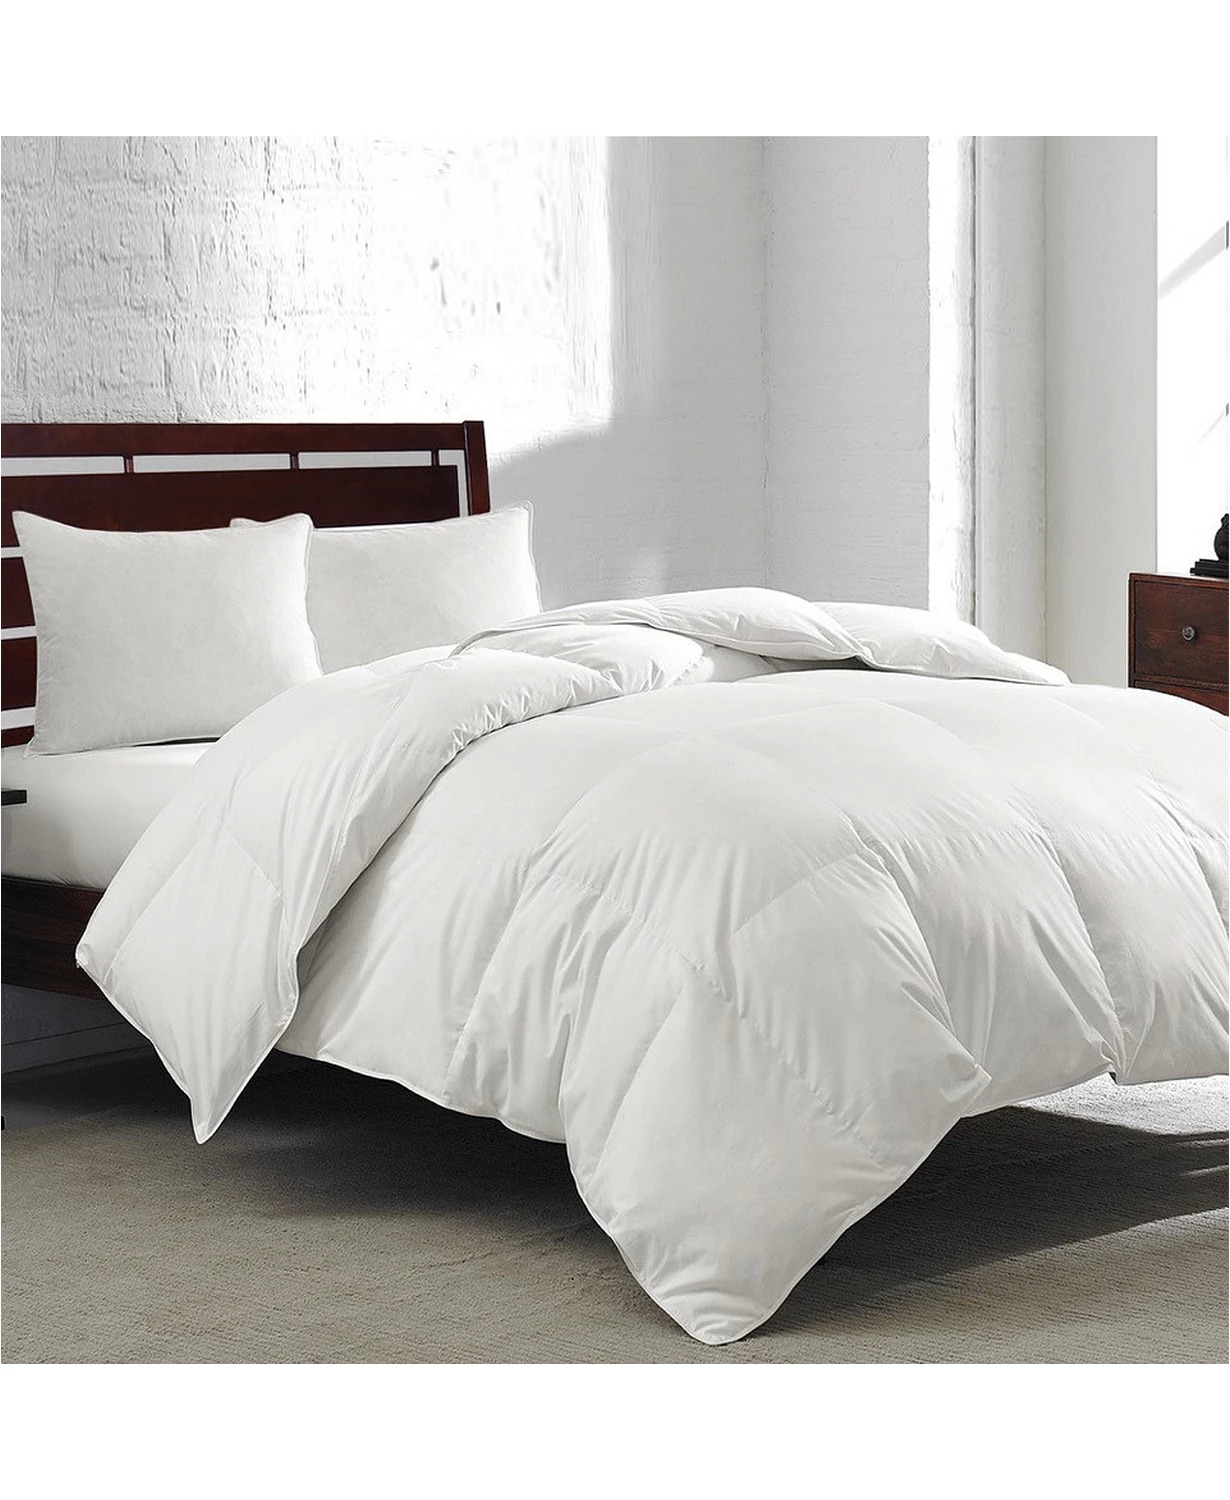 Royal Luxe White Goose Feather & Down 240-Thread Count Cotton Comforter: Twin $30, Queen $40, King $50 + 15% SD Cashback + Free Shipping